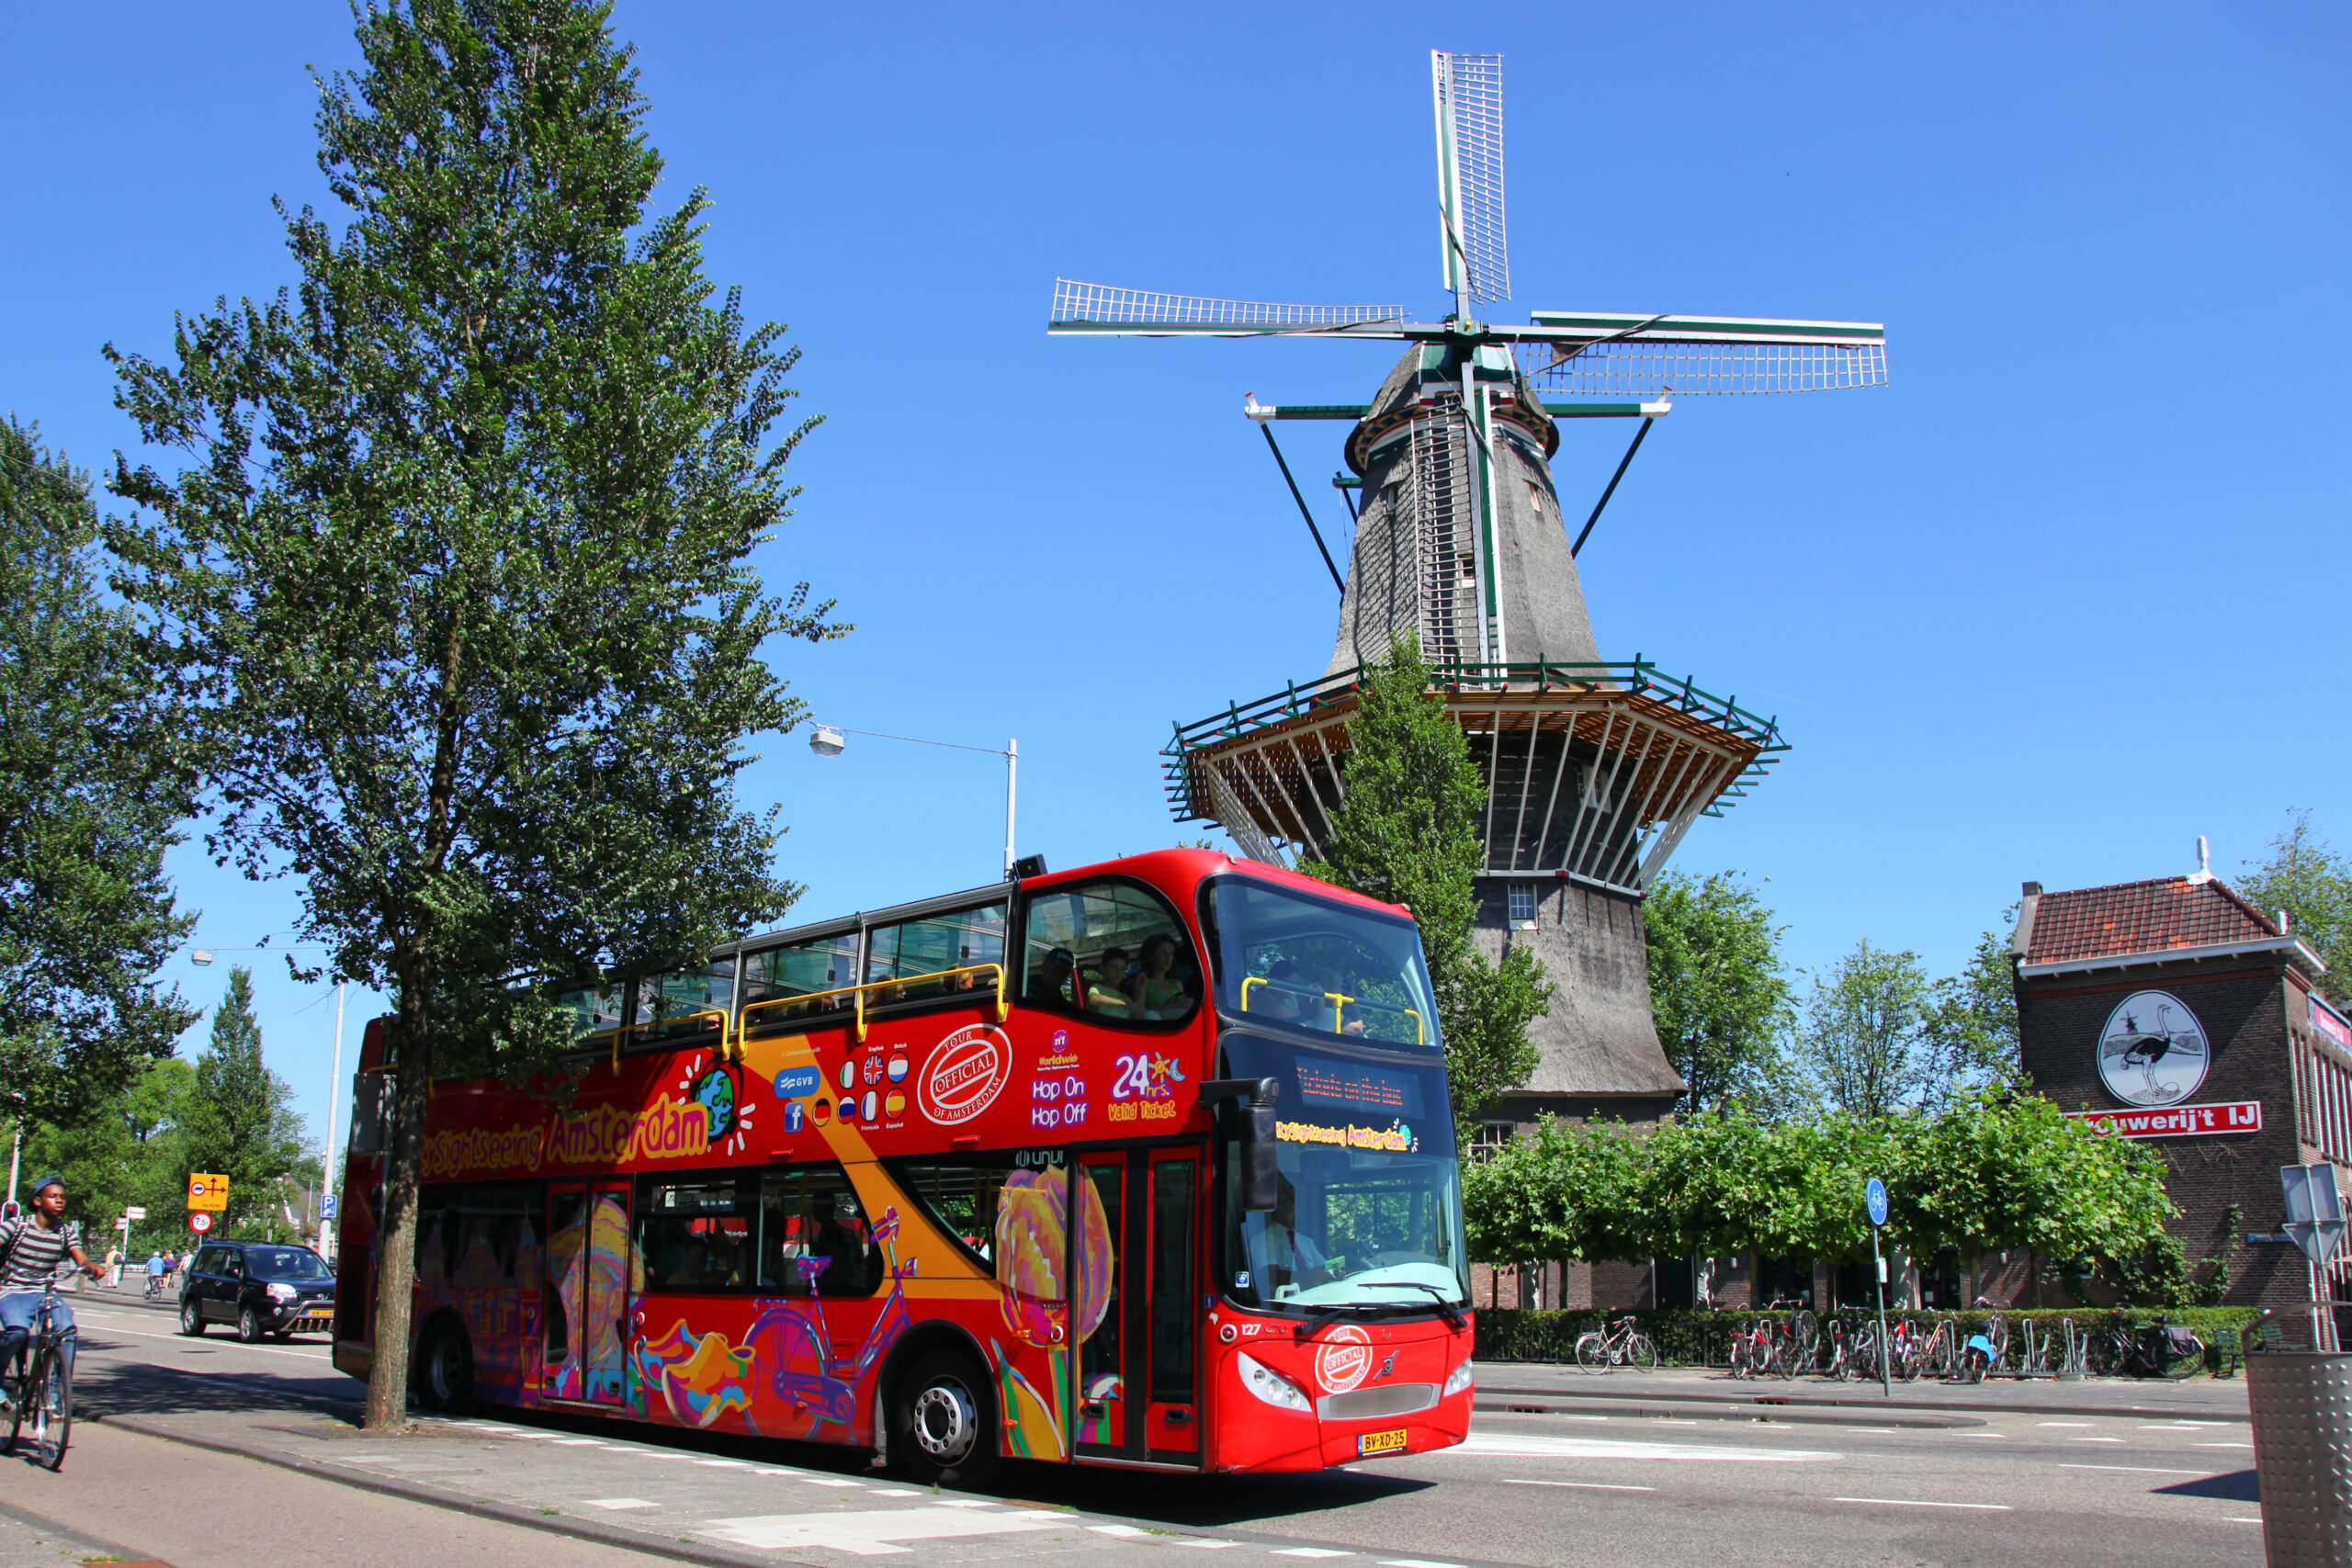 A hop-on hop-off Amsterdam bus tour driving past a windmill.